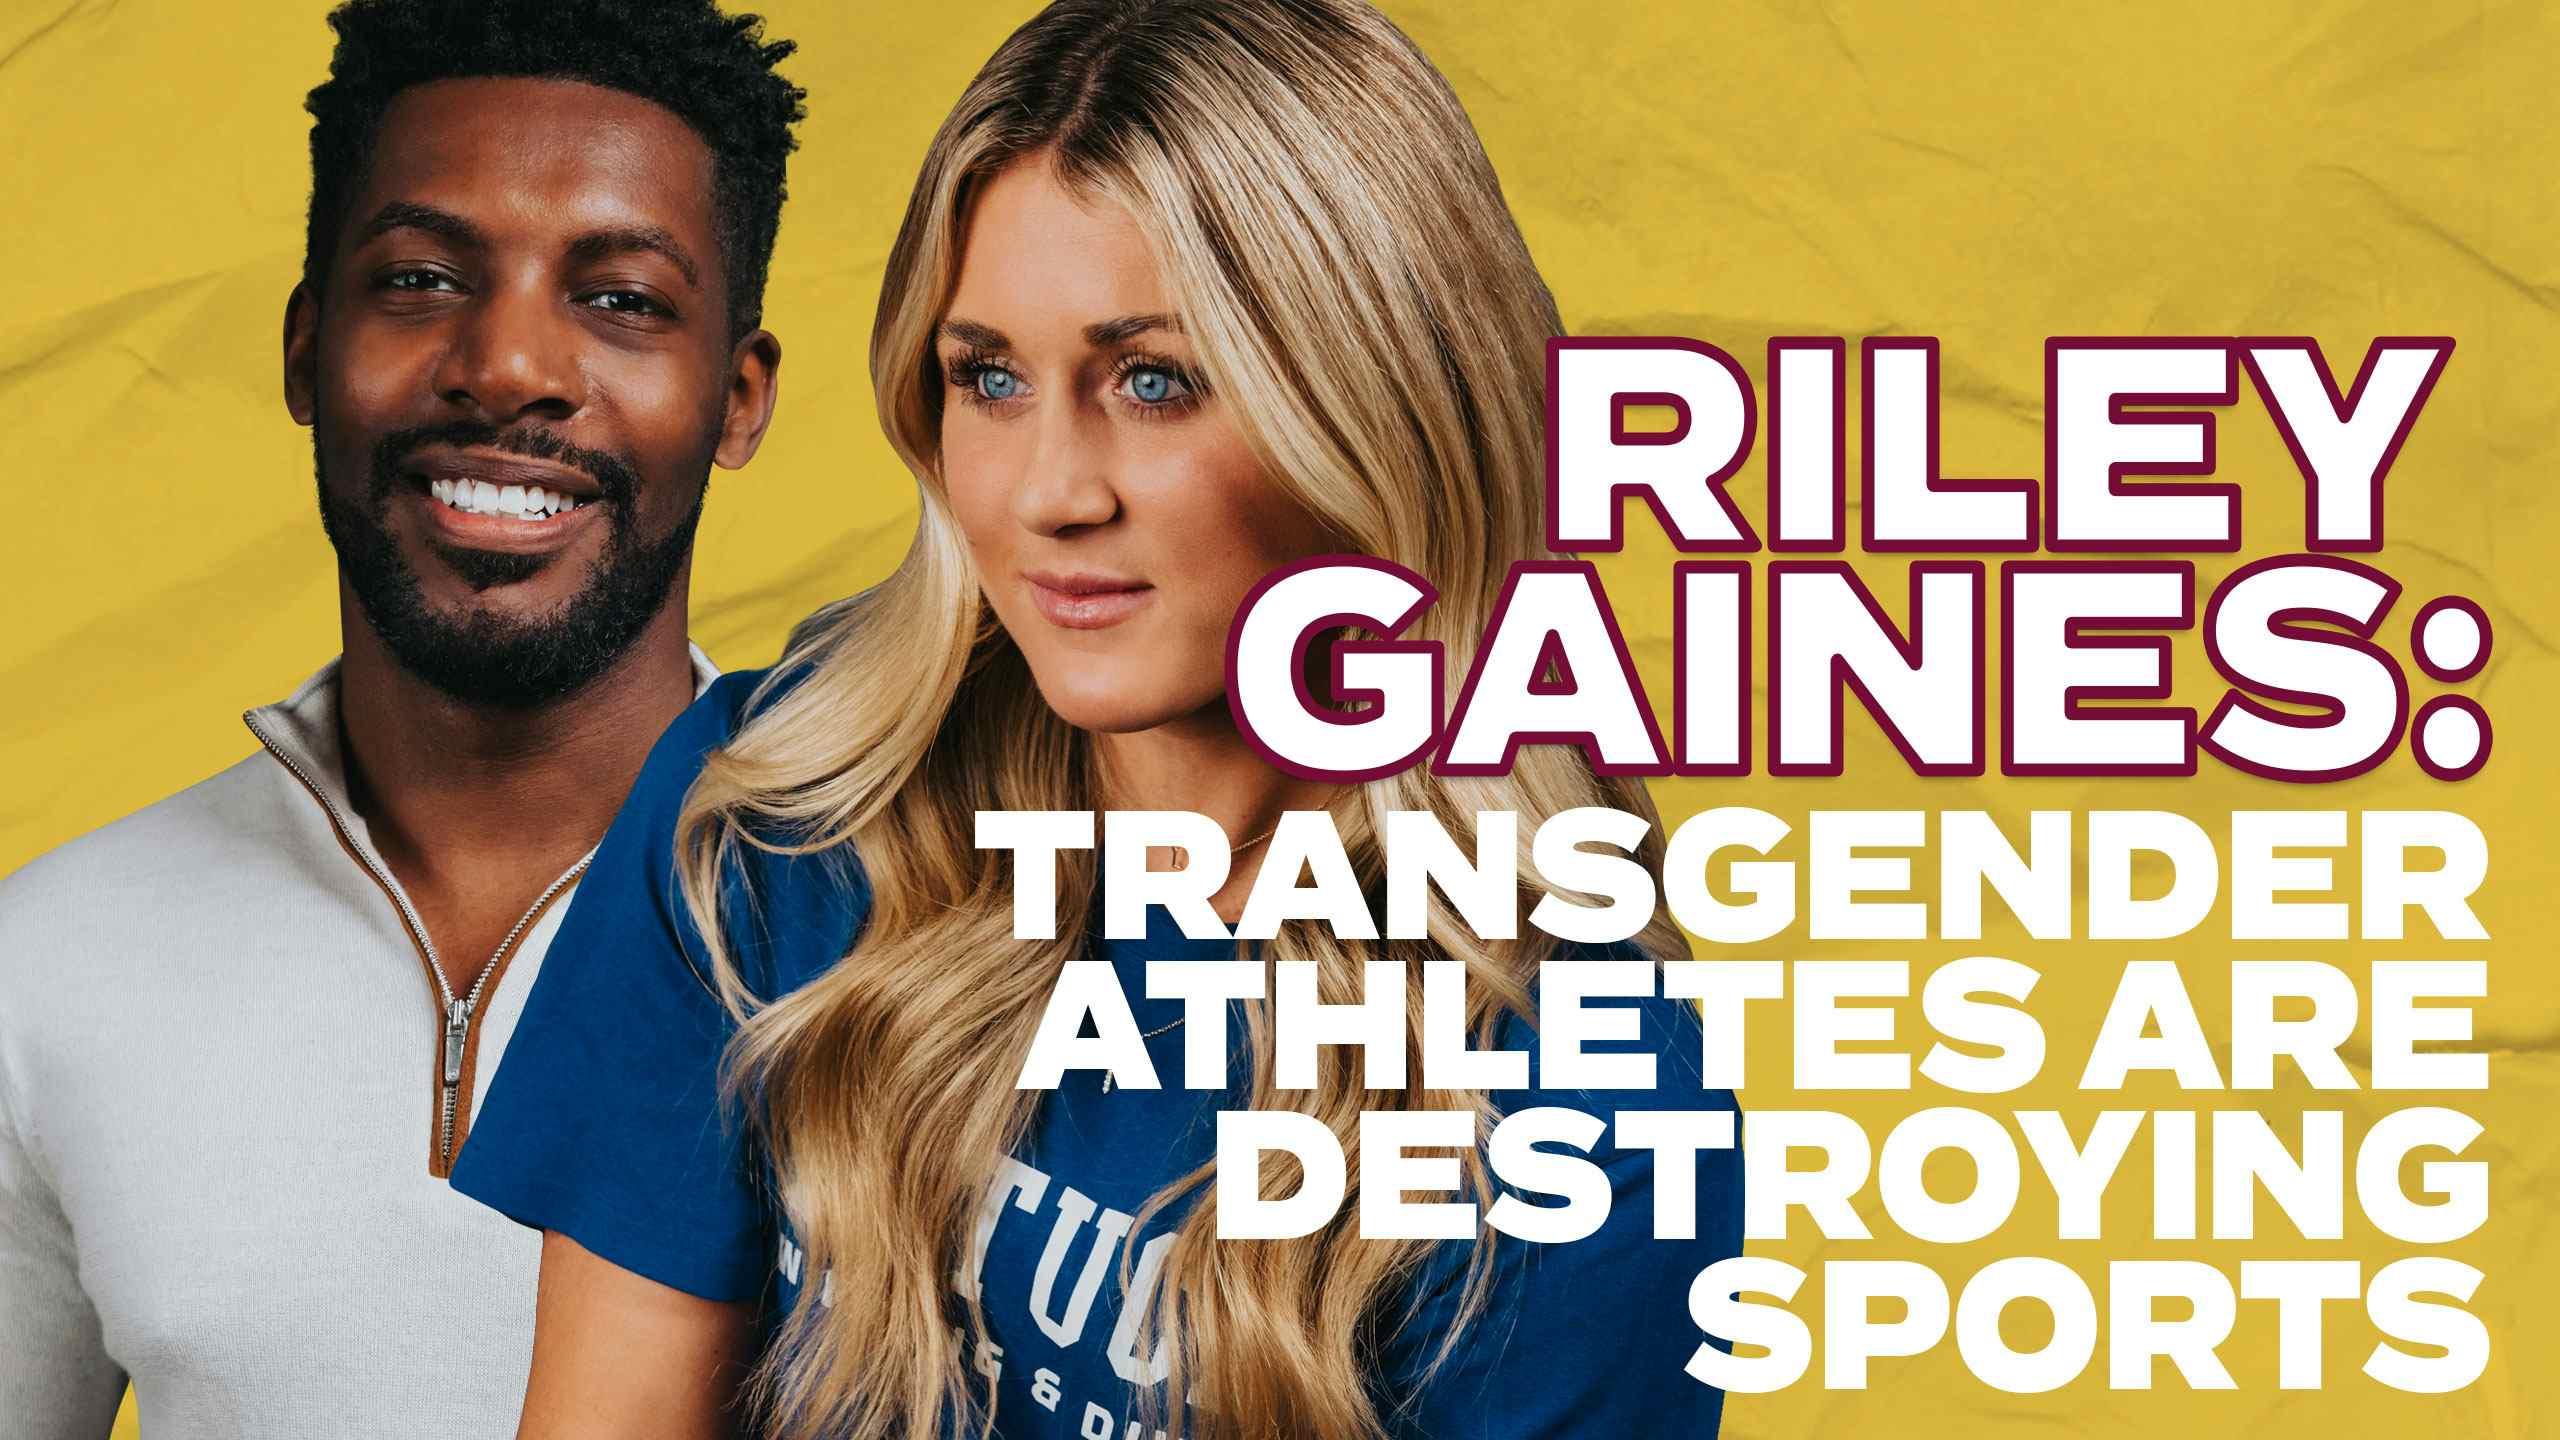 Riley Gaines Says Transgender Athletes Are Destroying Women's Sports